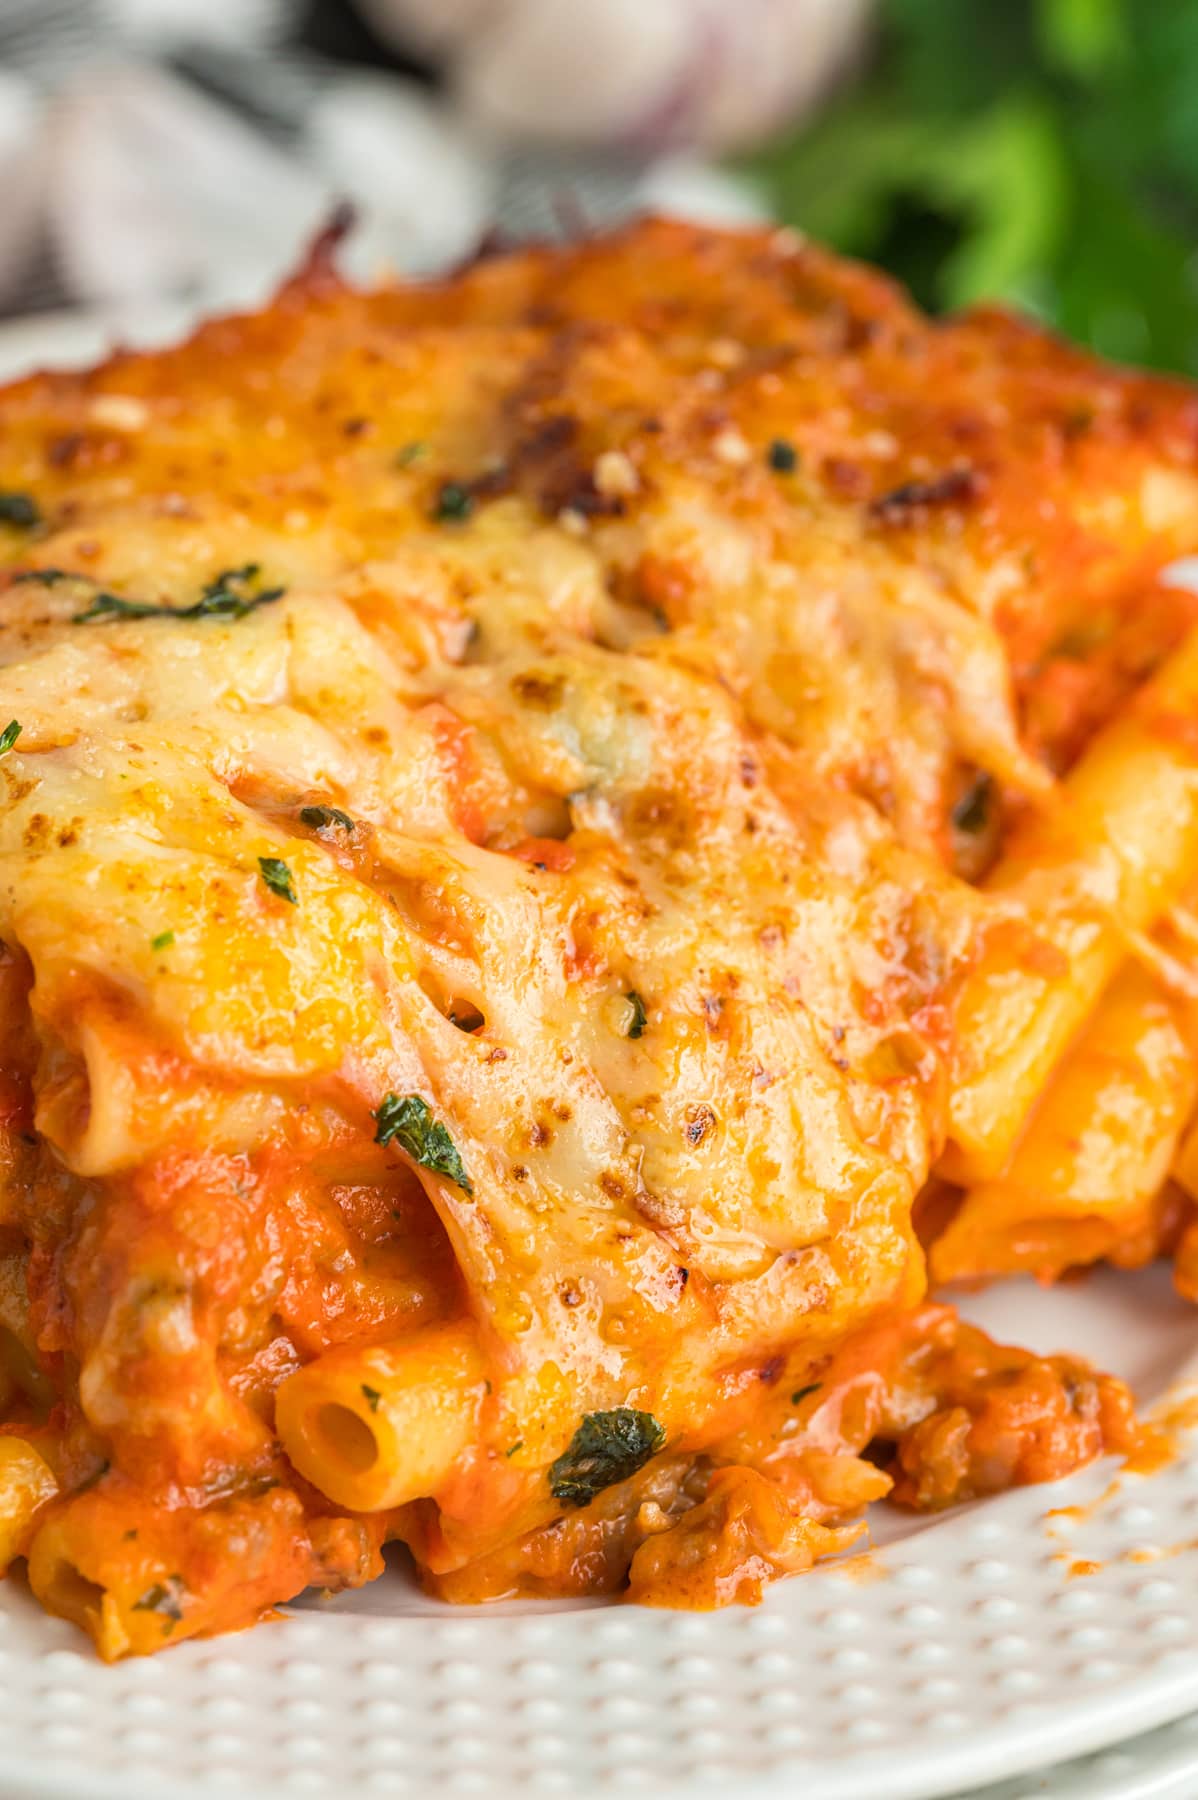 A serving of baked ziti on a plate